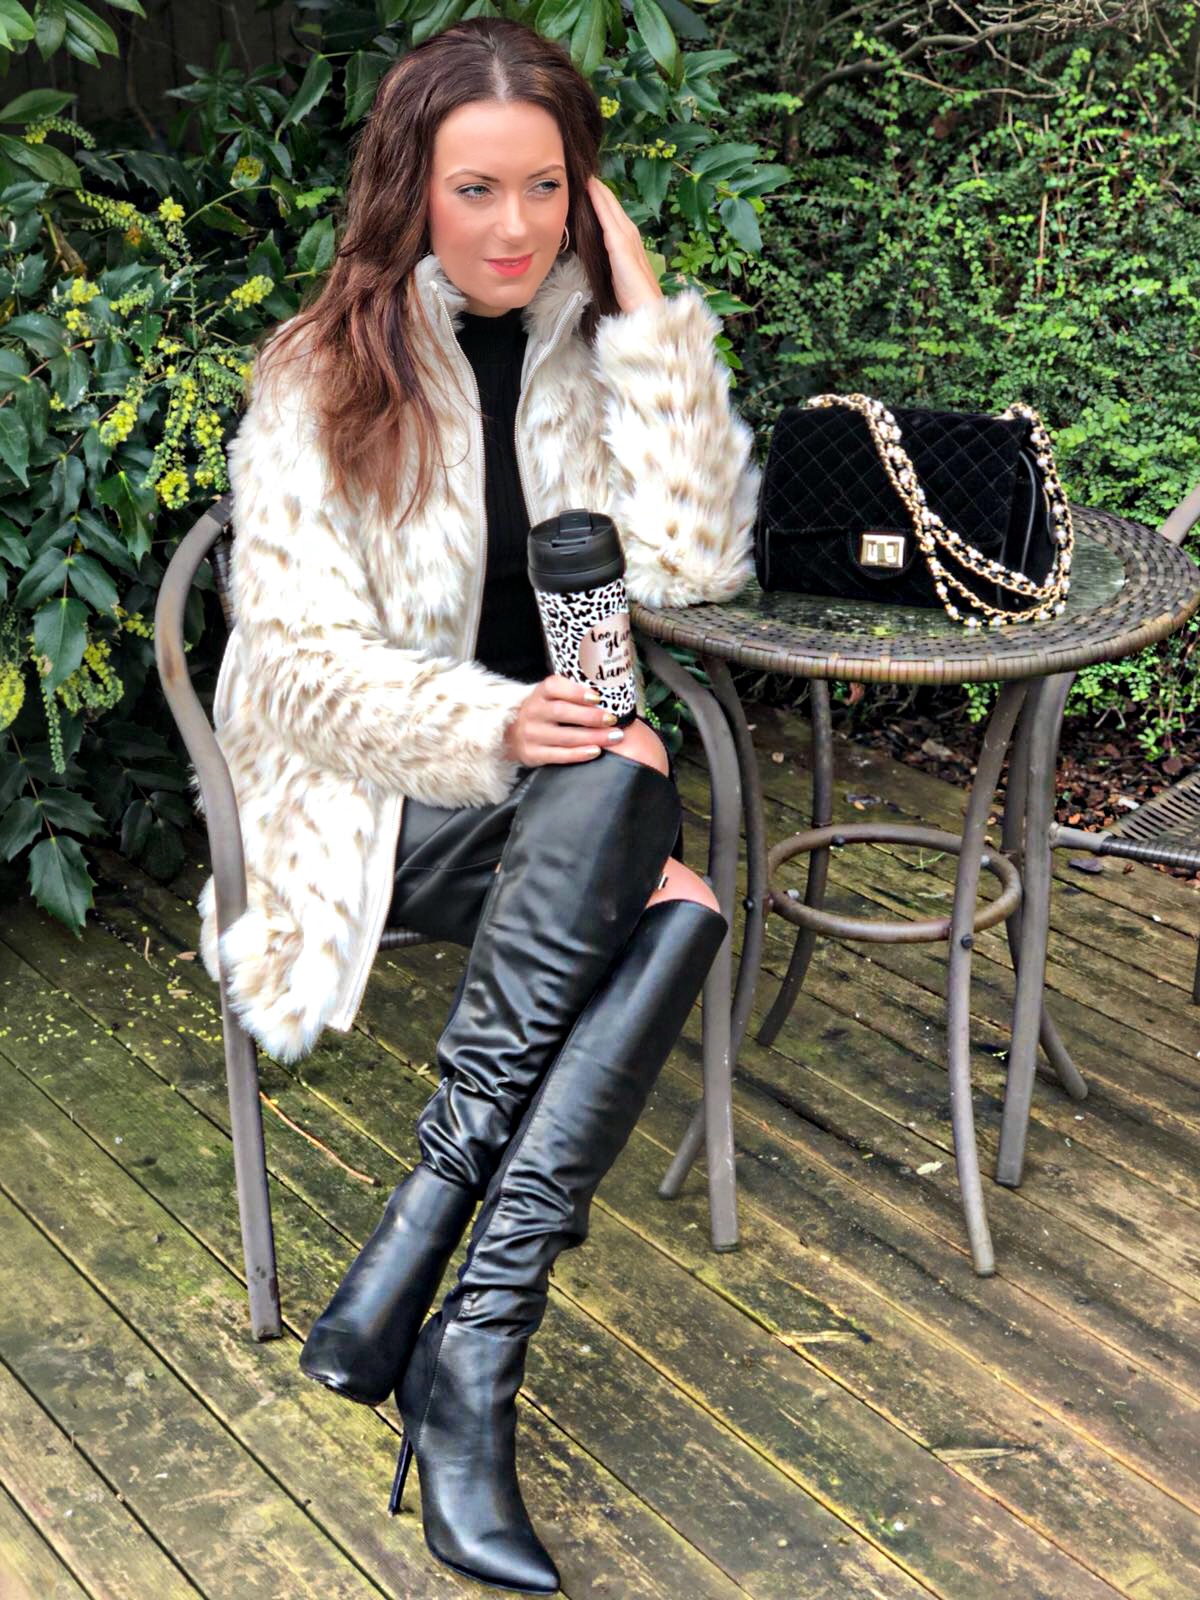 Marc B Quilted Velvet Cross Body | Lost Ink Panelled Knee High Boots | Lipsy Military Button Jumper | Lipsy Faux Fur Belted Coat | Swarovski earrings | Ted Baker gloves